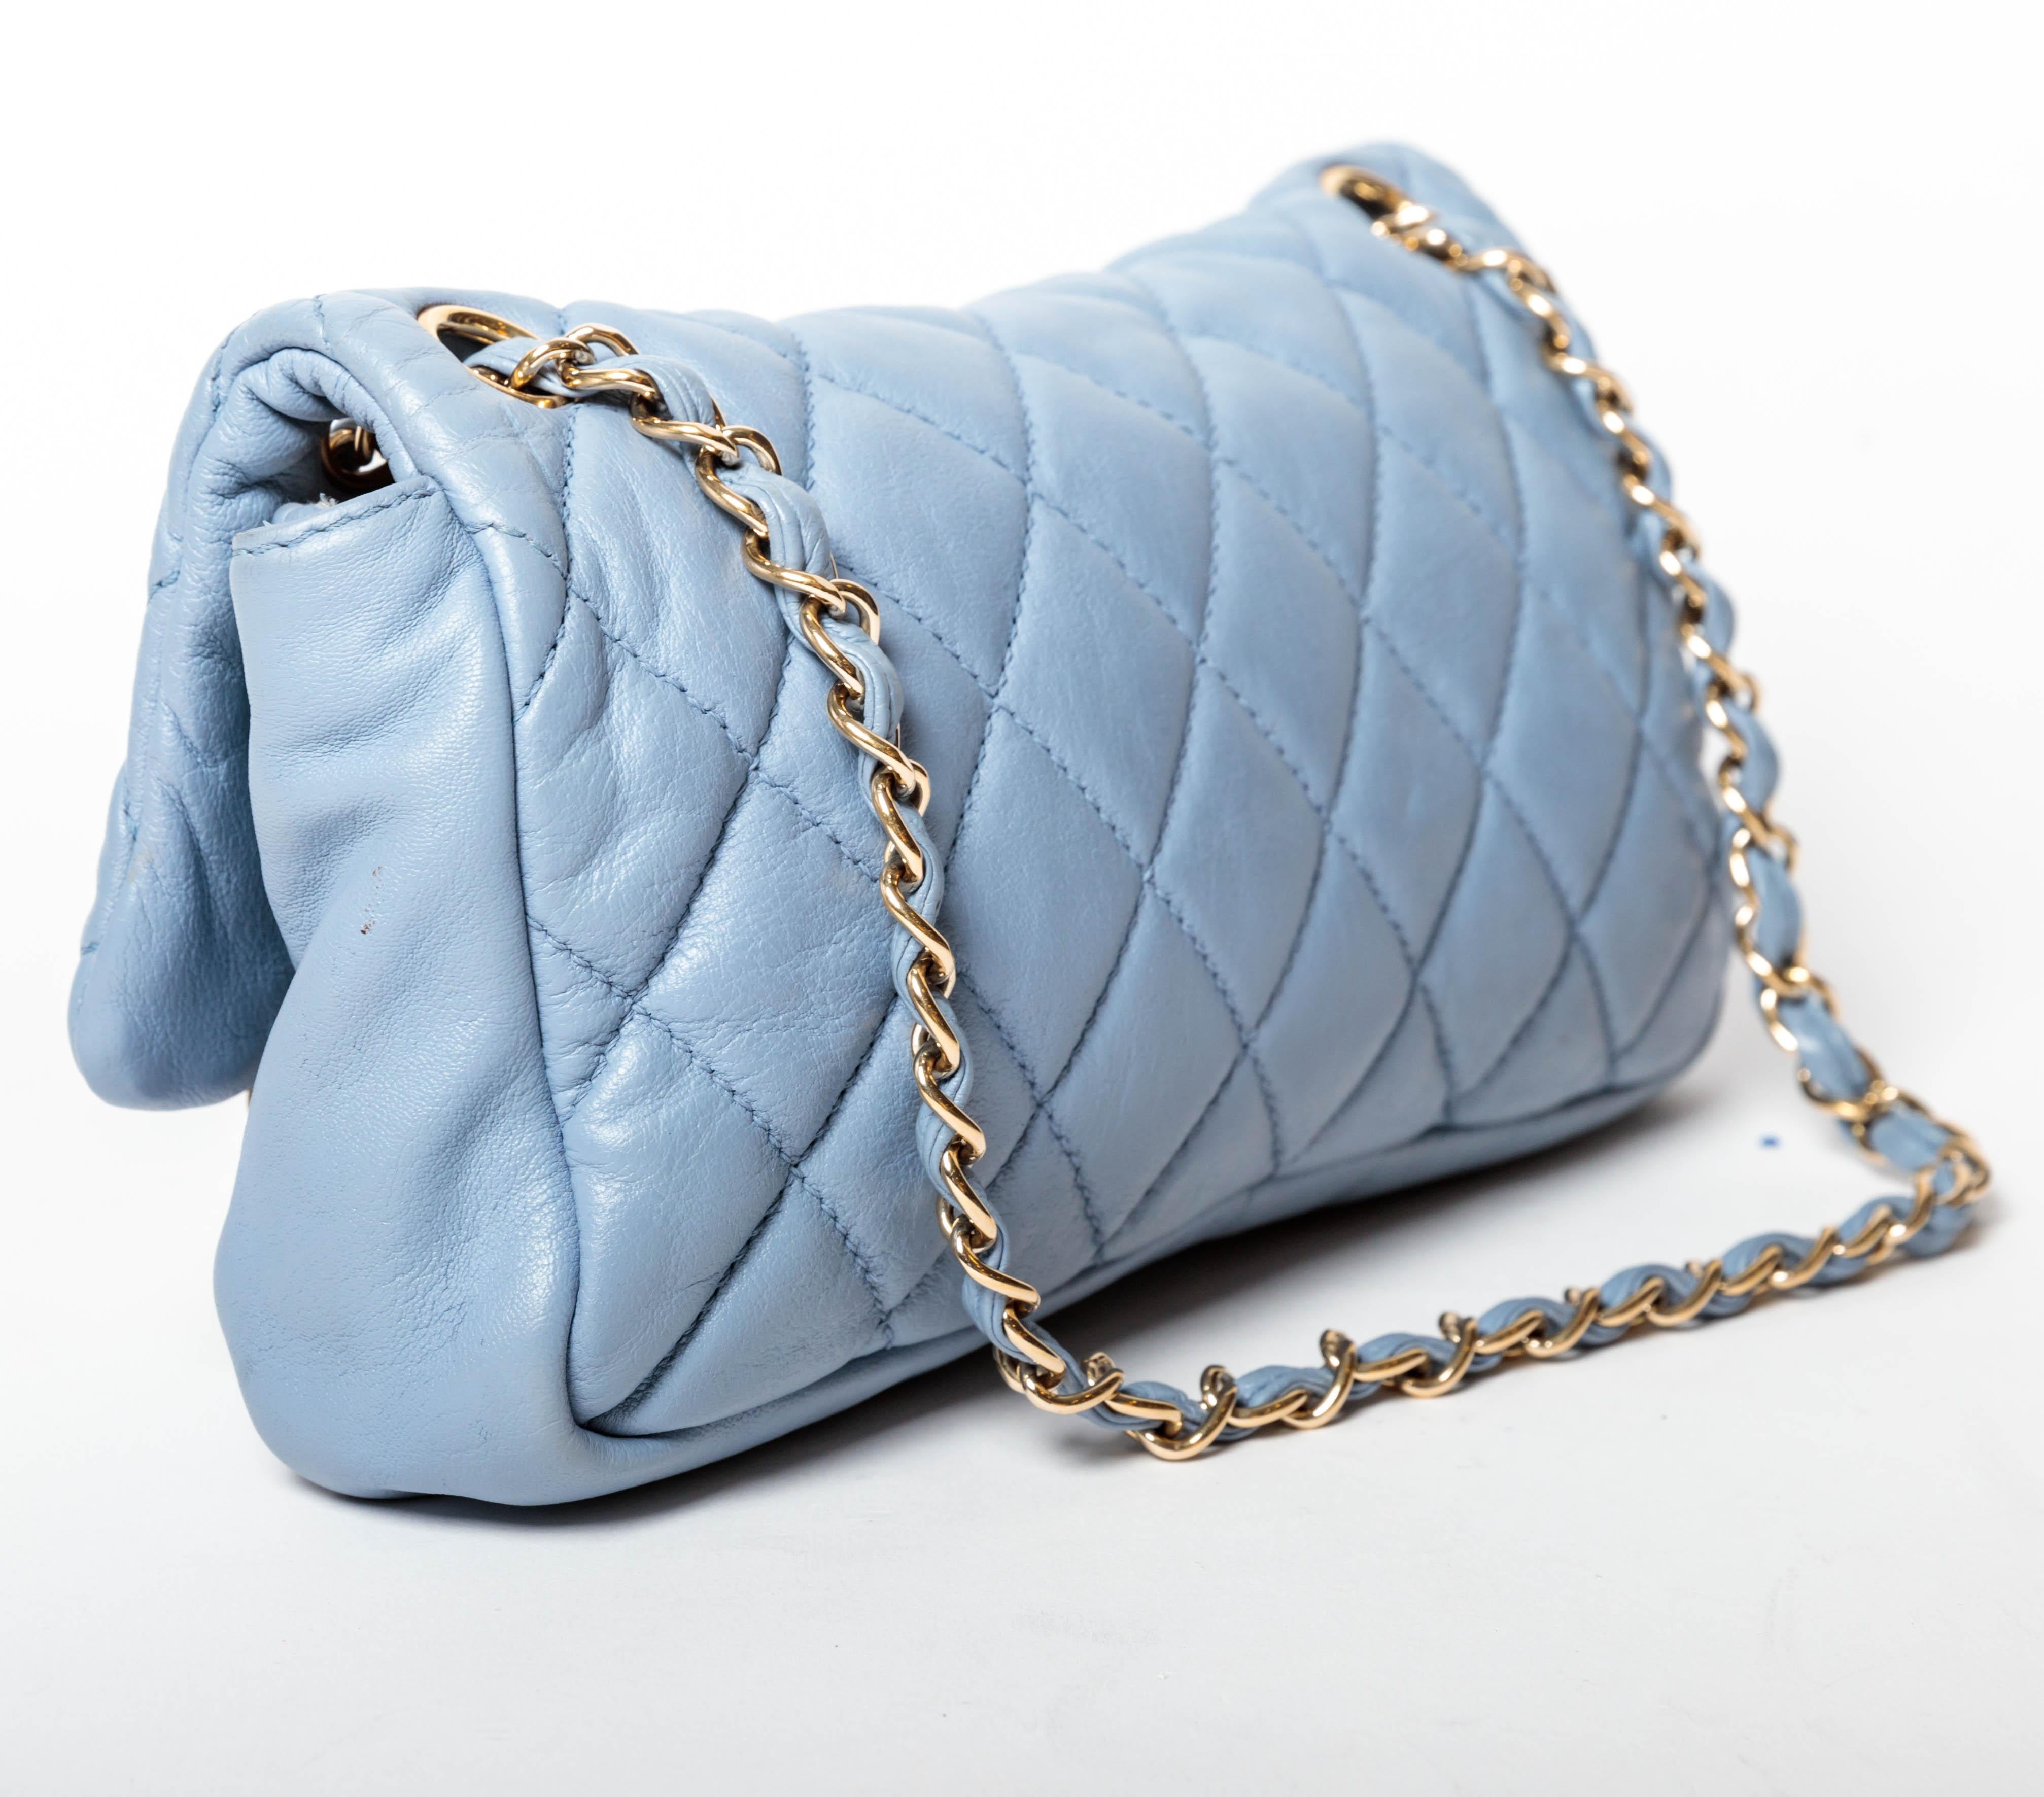 Women's Chanel Powder Blue Single Flap with Gold Hardware - 2005 - 2006 Collection For Sale